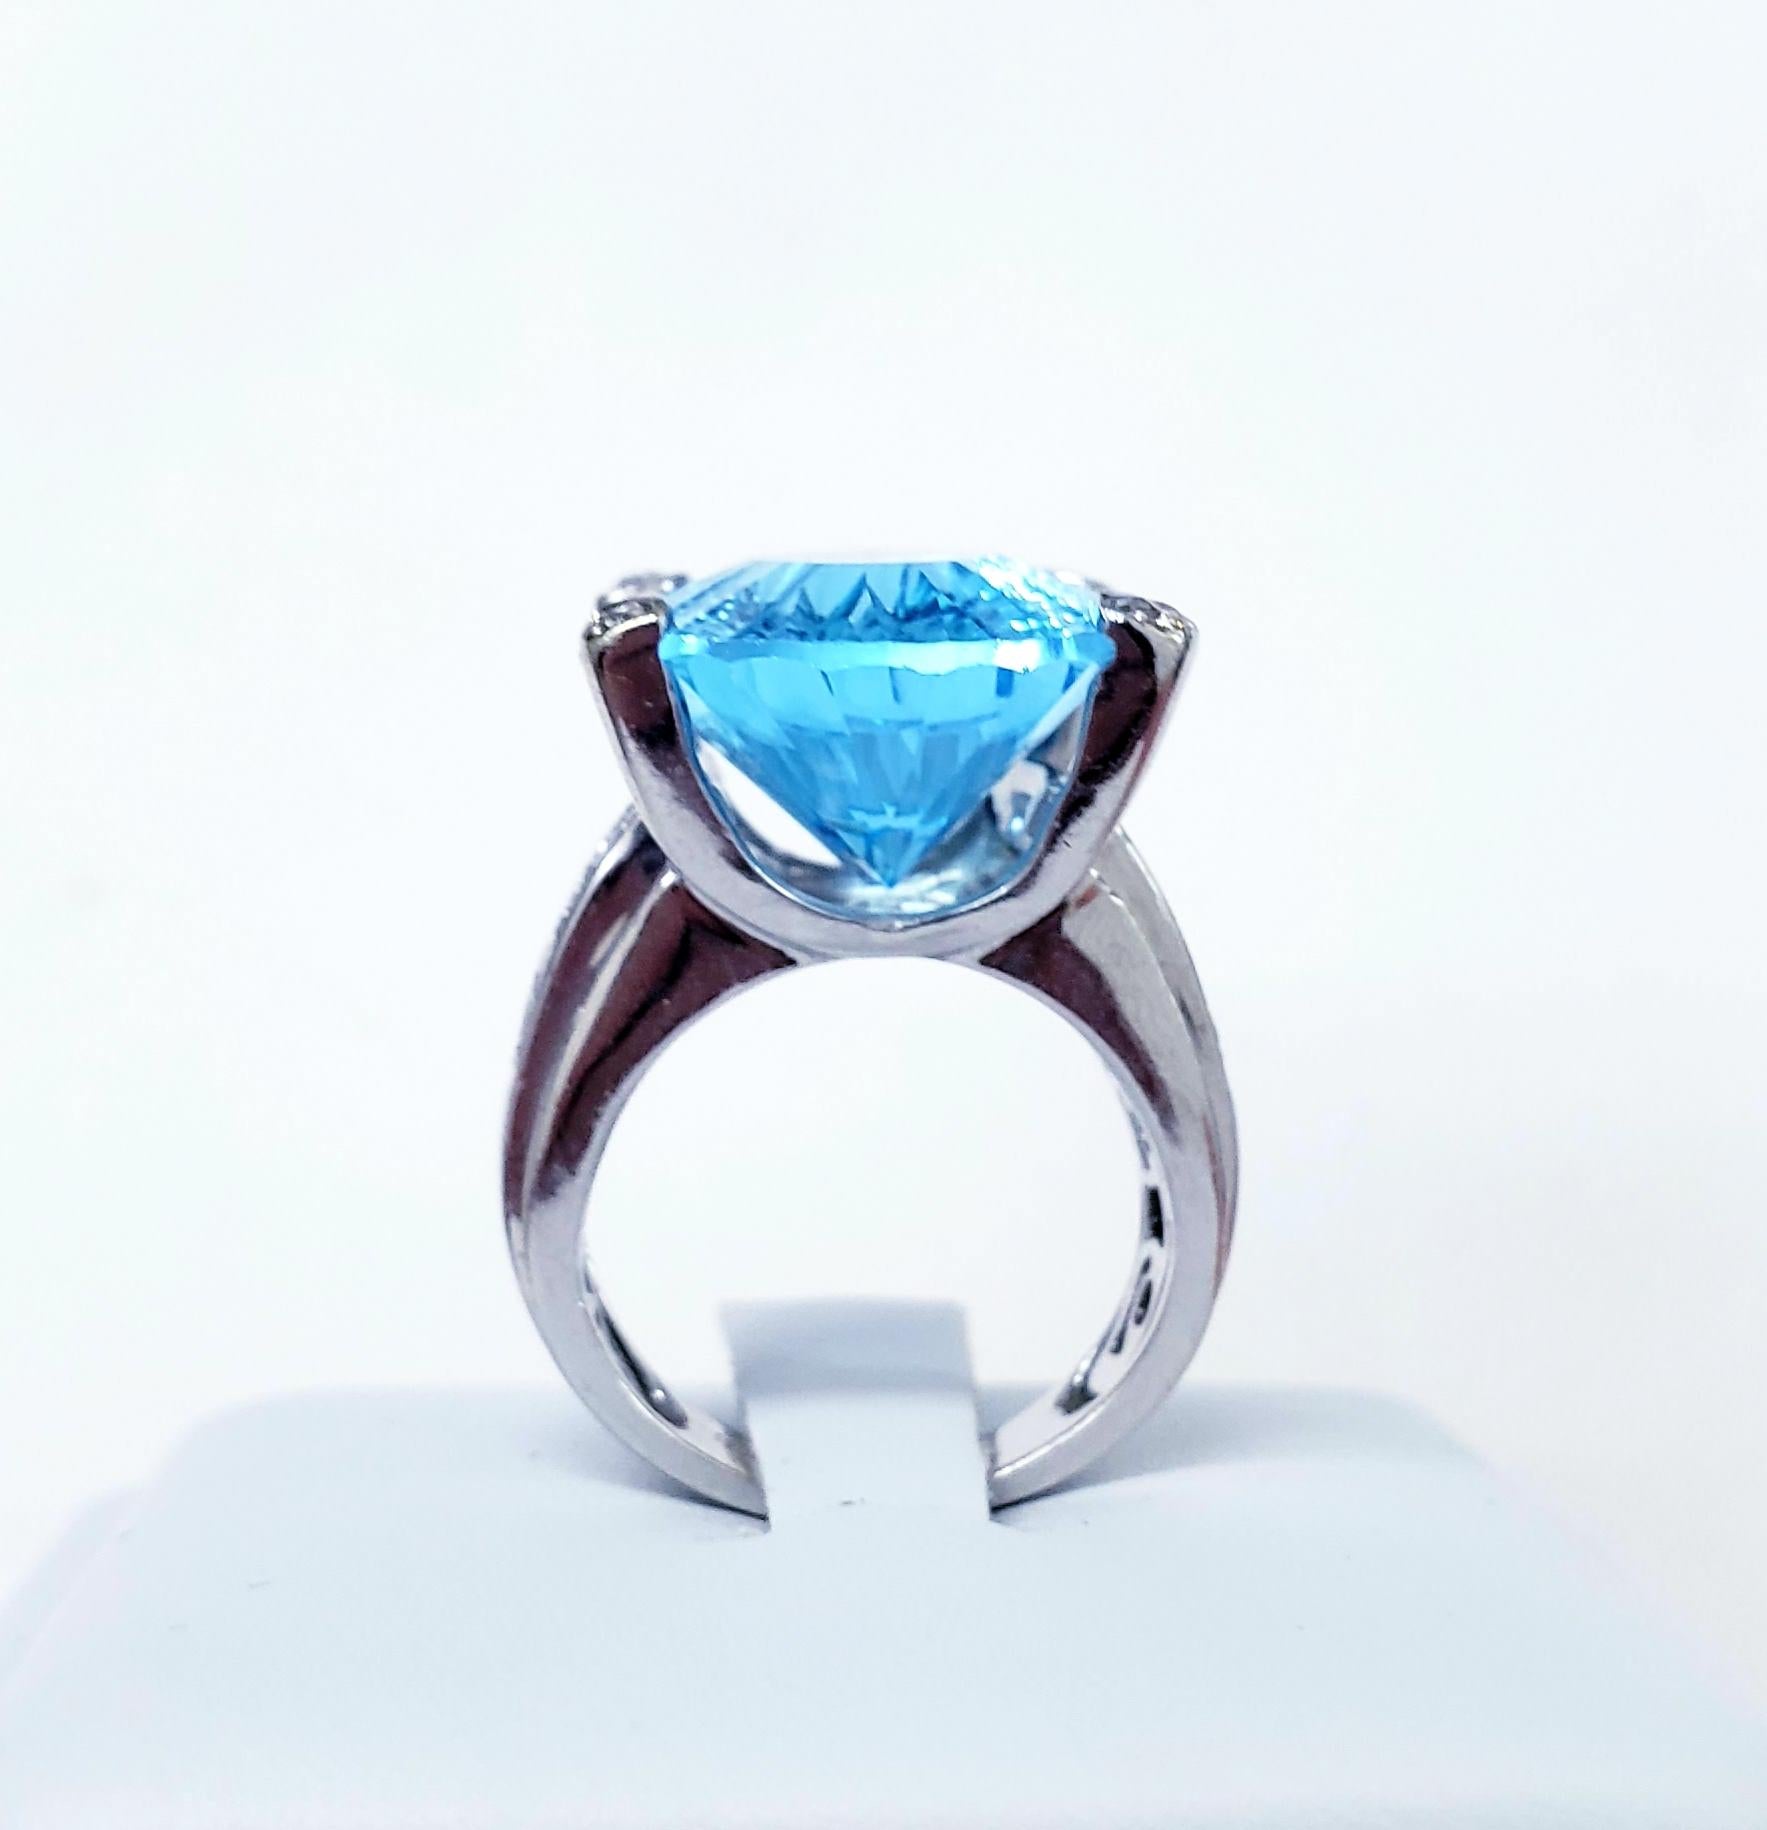 Modern Bold cocktail ring featuring a massive 20mm X 15mm (Approx 17 carats) oval Blue Topaz gemstone and 0.50tcw in round diamonds hand crafted in 18k white gold. 
Size 5
Circa 2000s 
